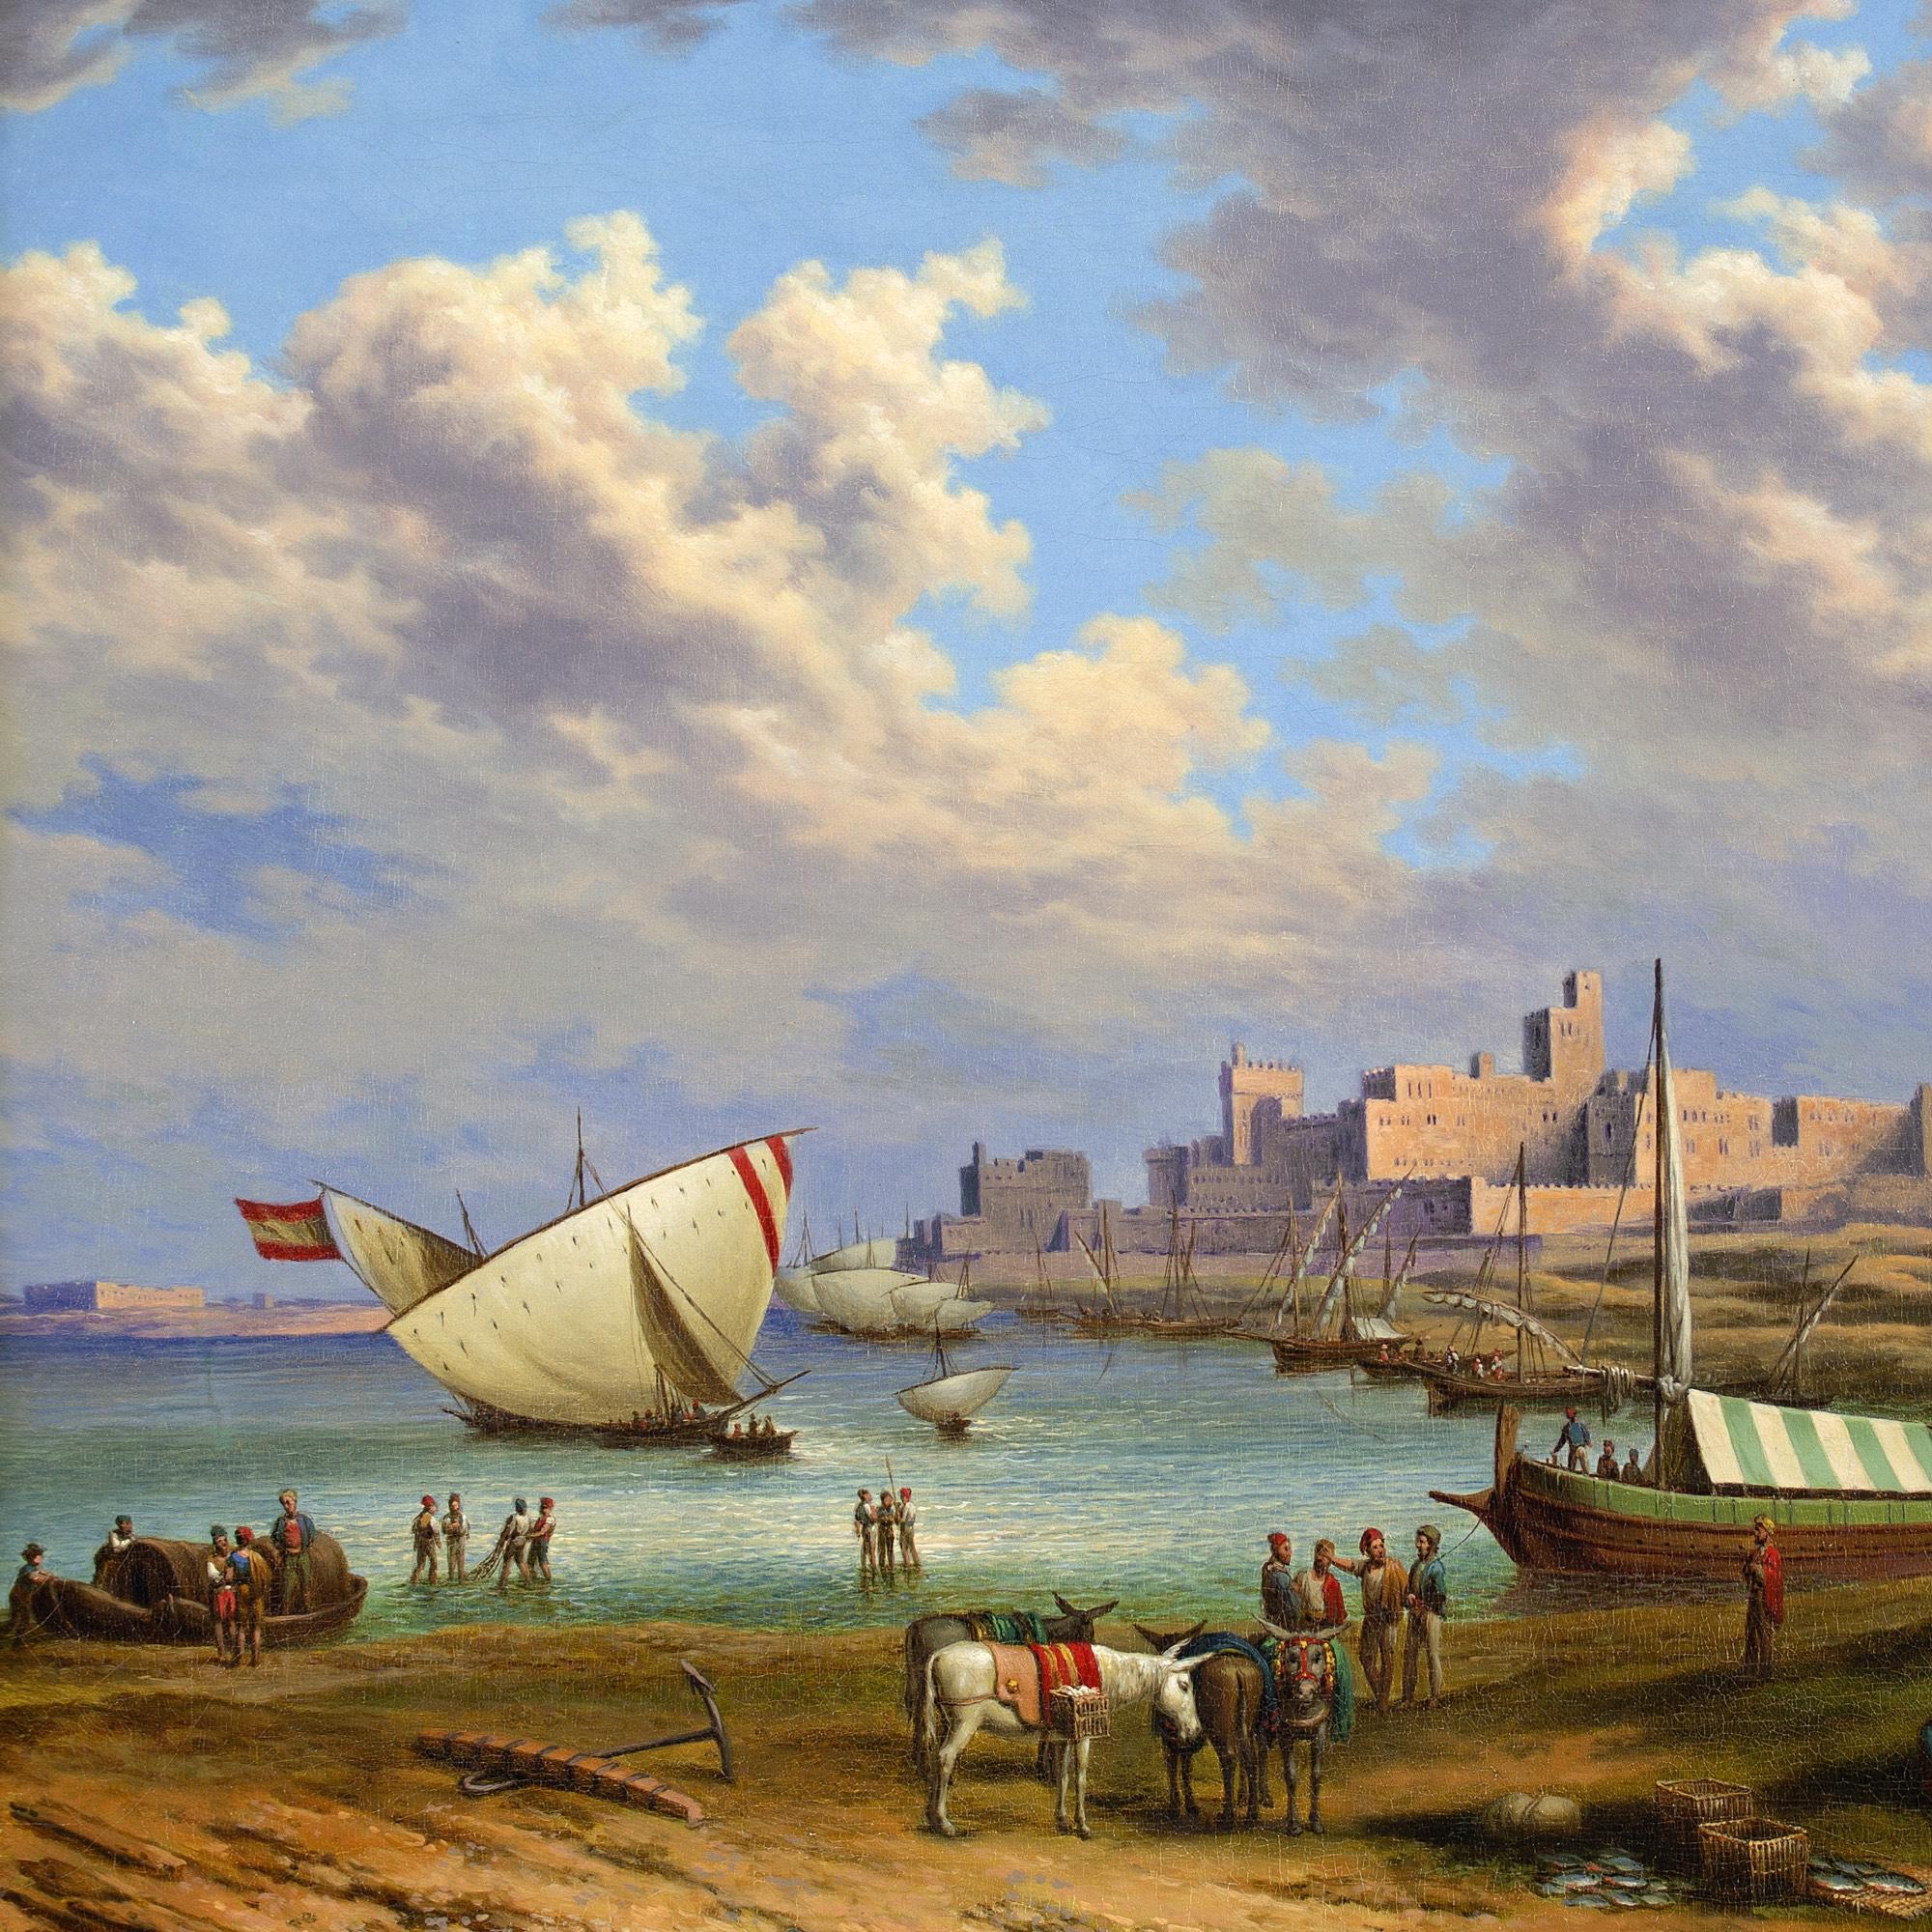 This mid-19th-century oil painting depicts the sun-drenched port of Tarifa in southern Spain. It’s after an engraving by Scottish artist David Roberts RA (1796-1864).

Under a vivid Mediterranean sky abundant with passing clouds, sailors rest and